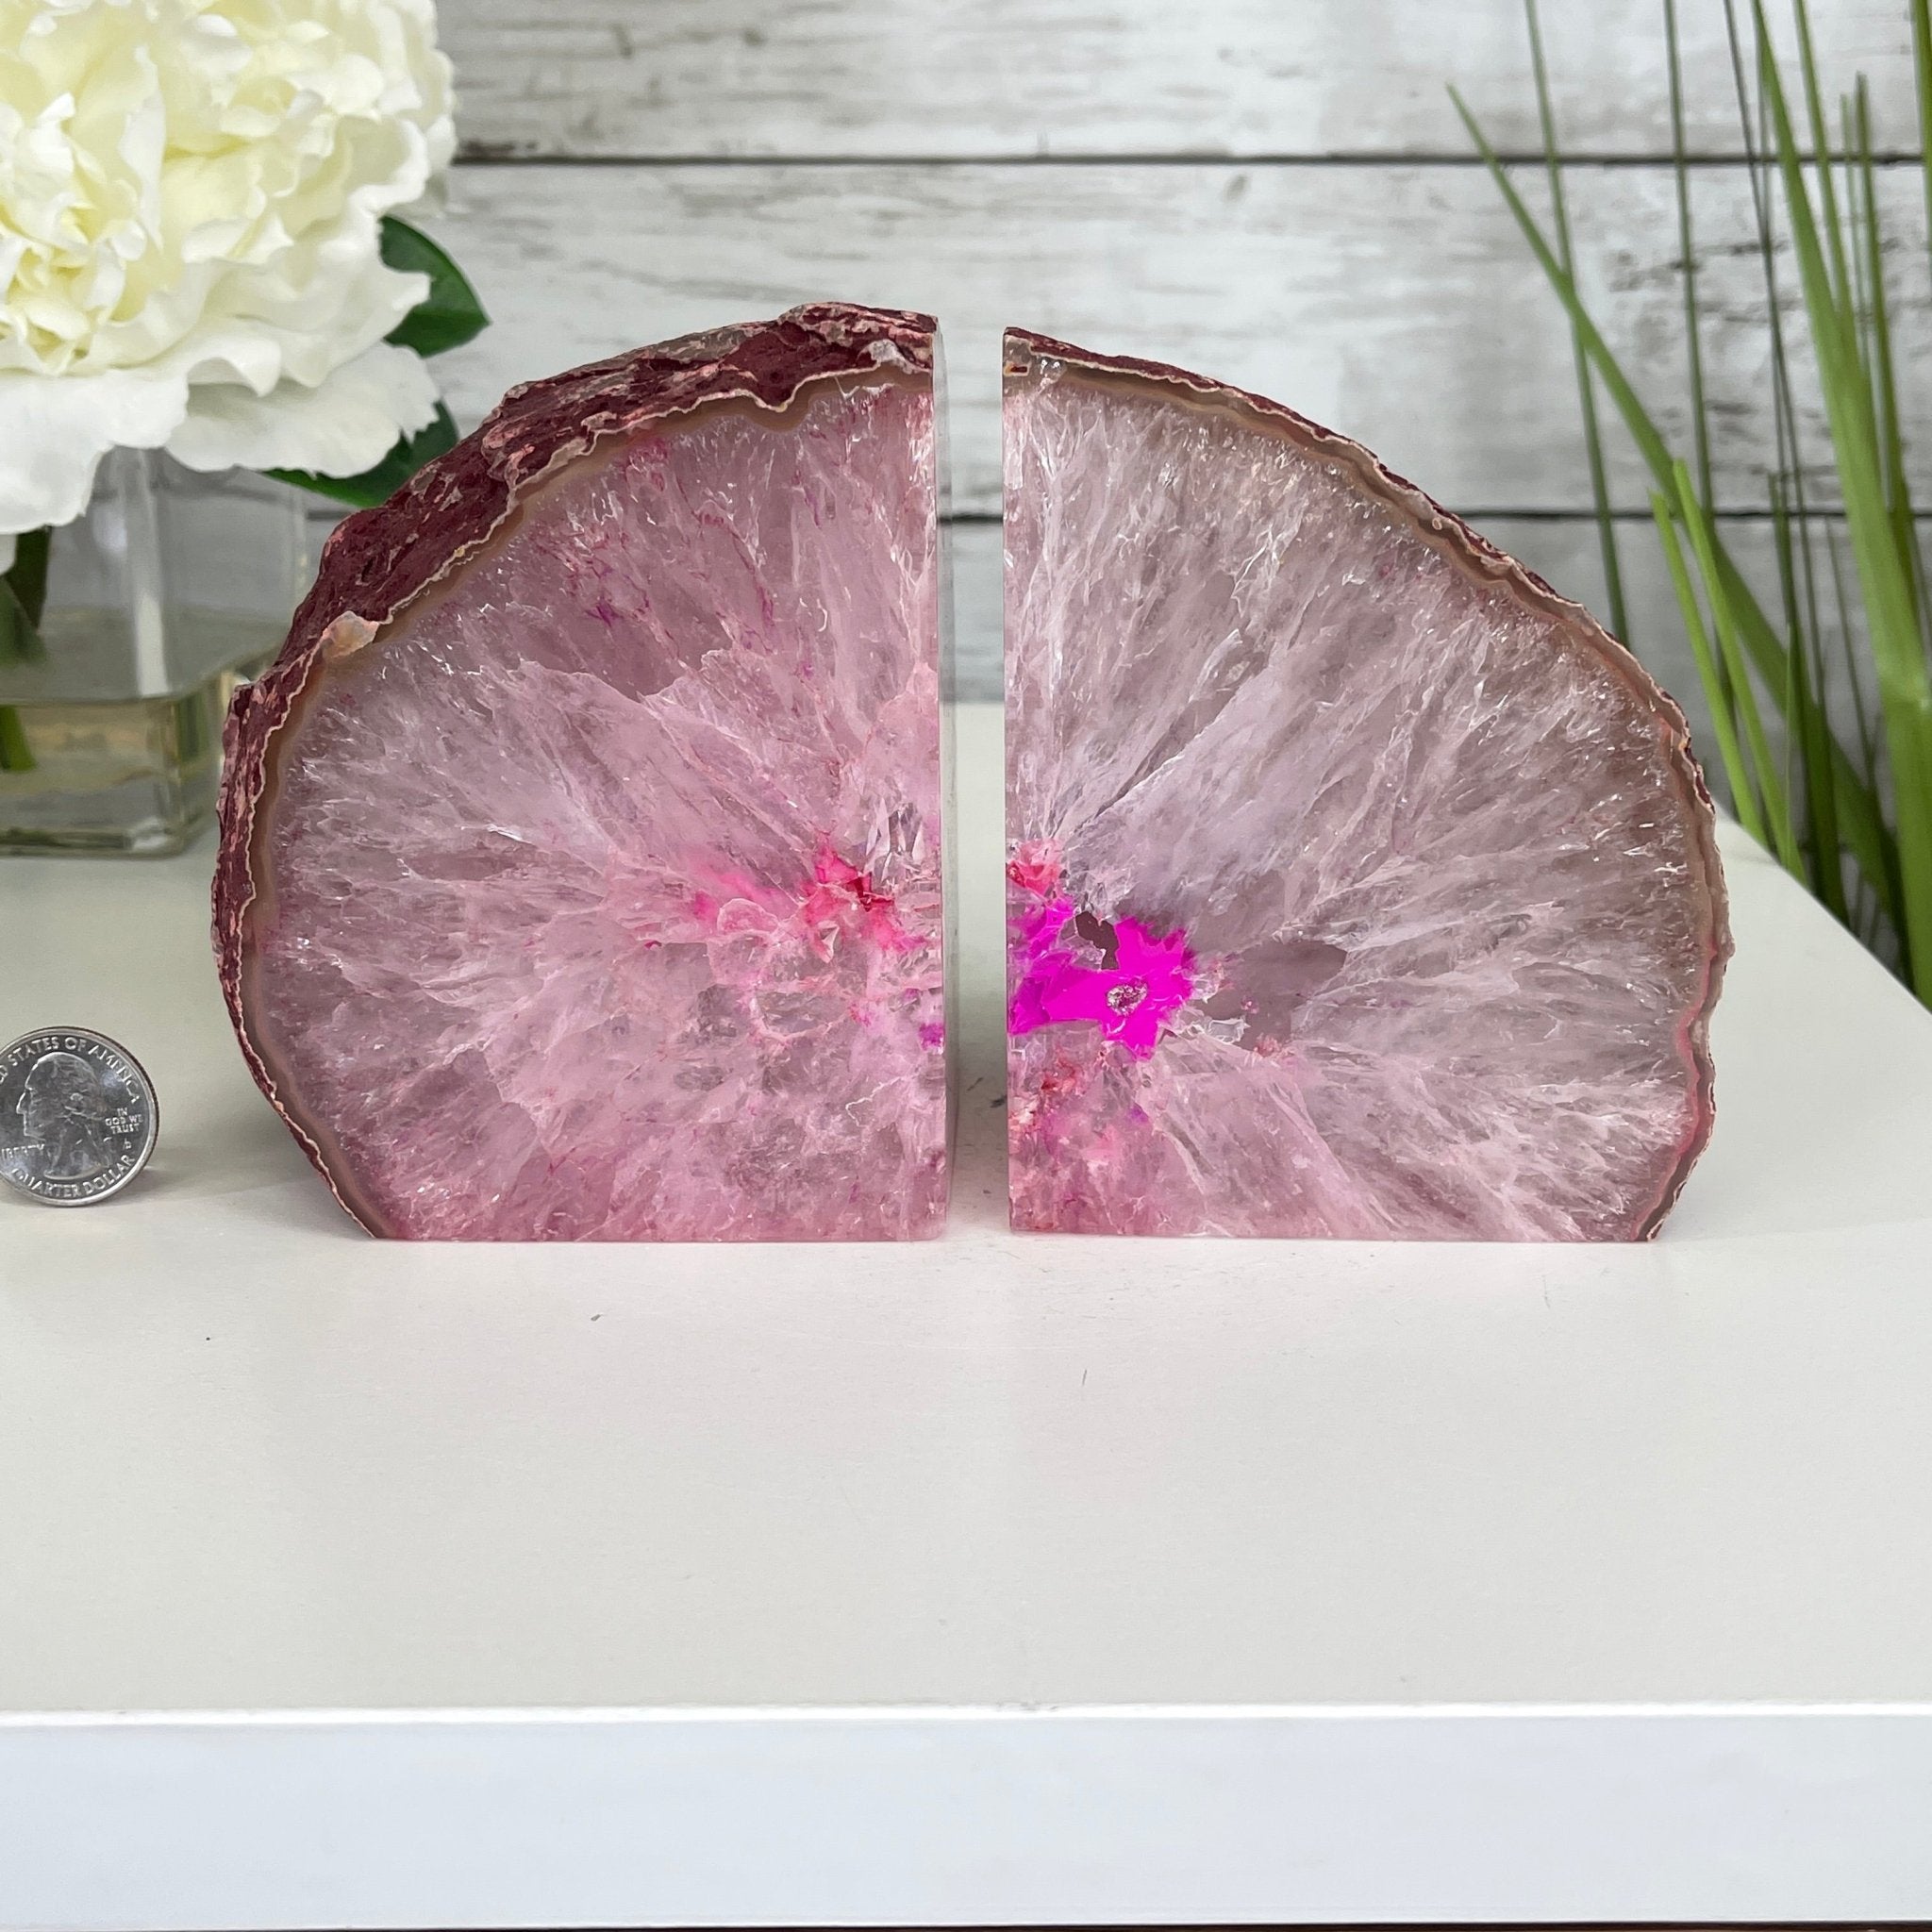 Pink Dyed Brazilian Agate Stone Bookends, 4.5" tall & 6 lbs #5151-0023 by Brazil Gems - Brazil GemsBrazil GemsPink Dyed Brazilian Agate Stone Bookends, 4.5" tall & 6 lbs #5151-0023 by Brazil GemsBookends5151PA-023